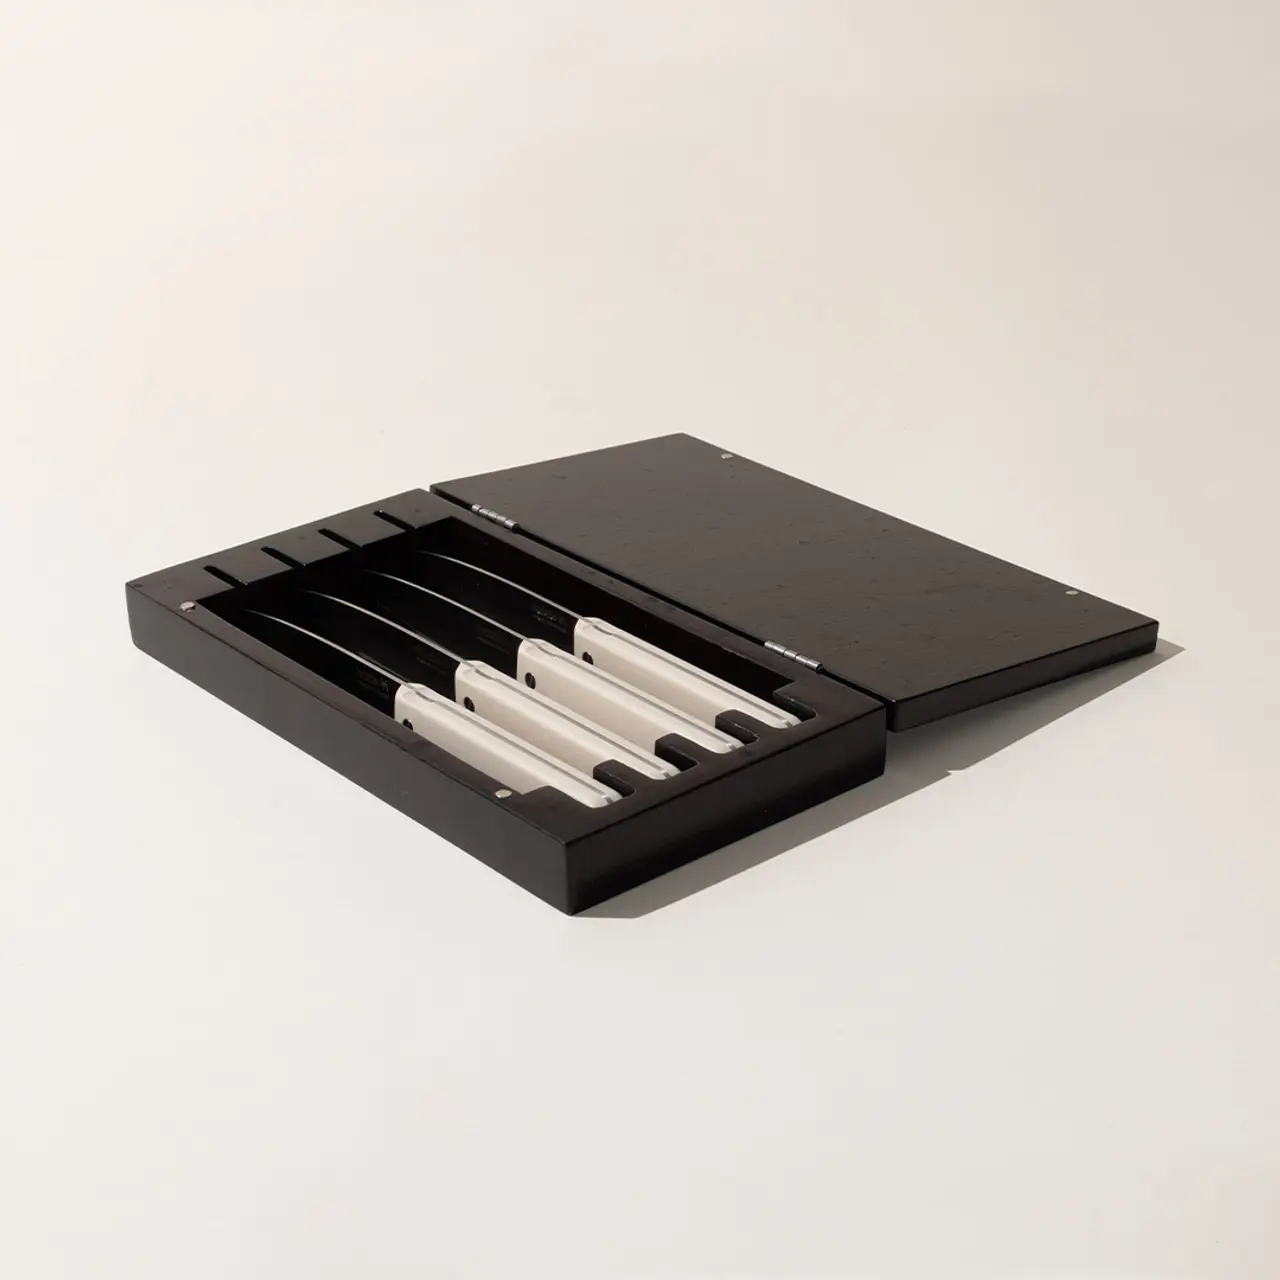 A sleek black box is open to reveal neatly arranged white minimalist design pens on a light grey background.